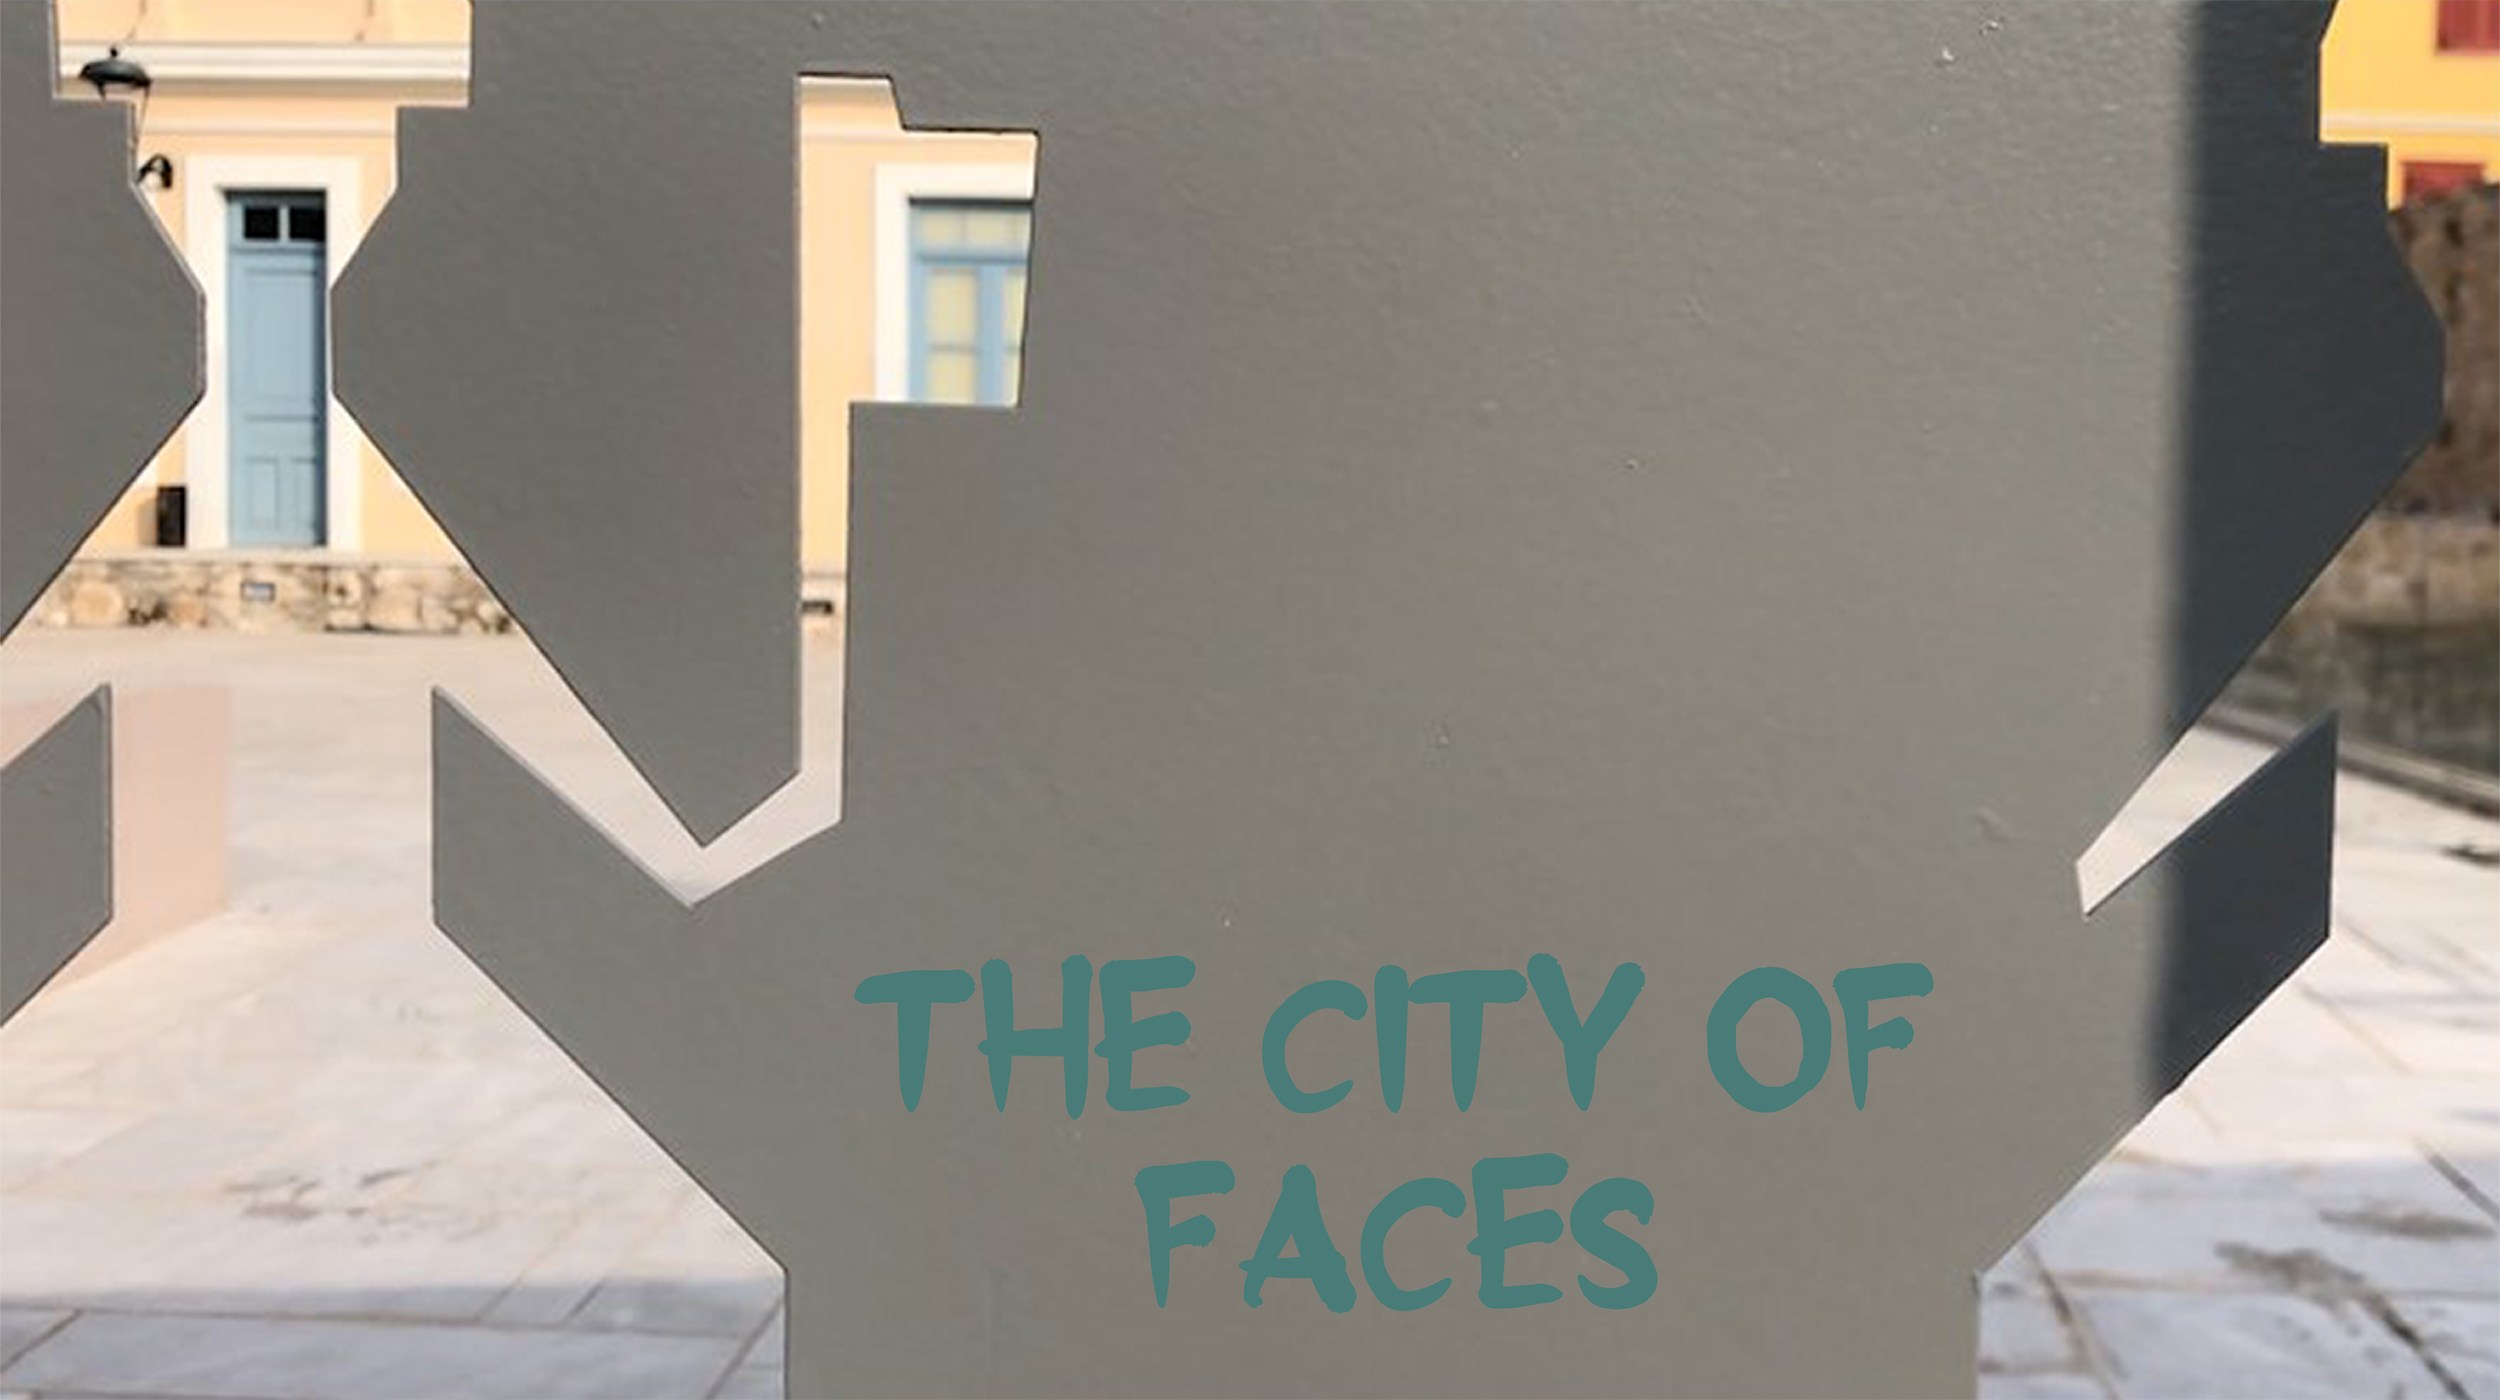 City of faces ENG (1)